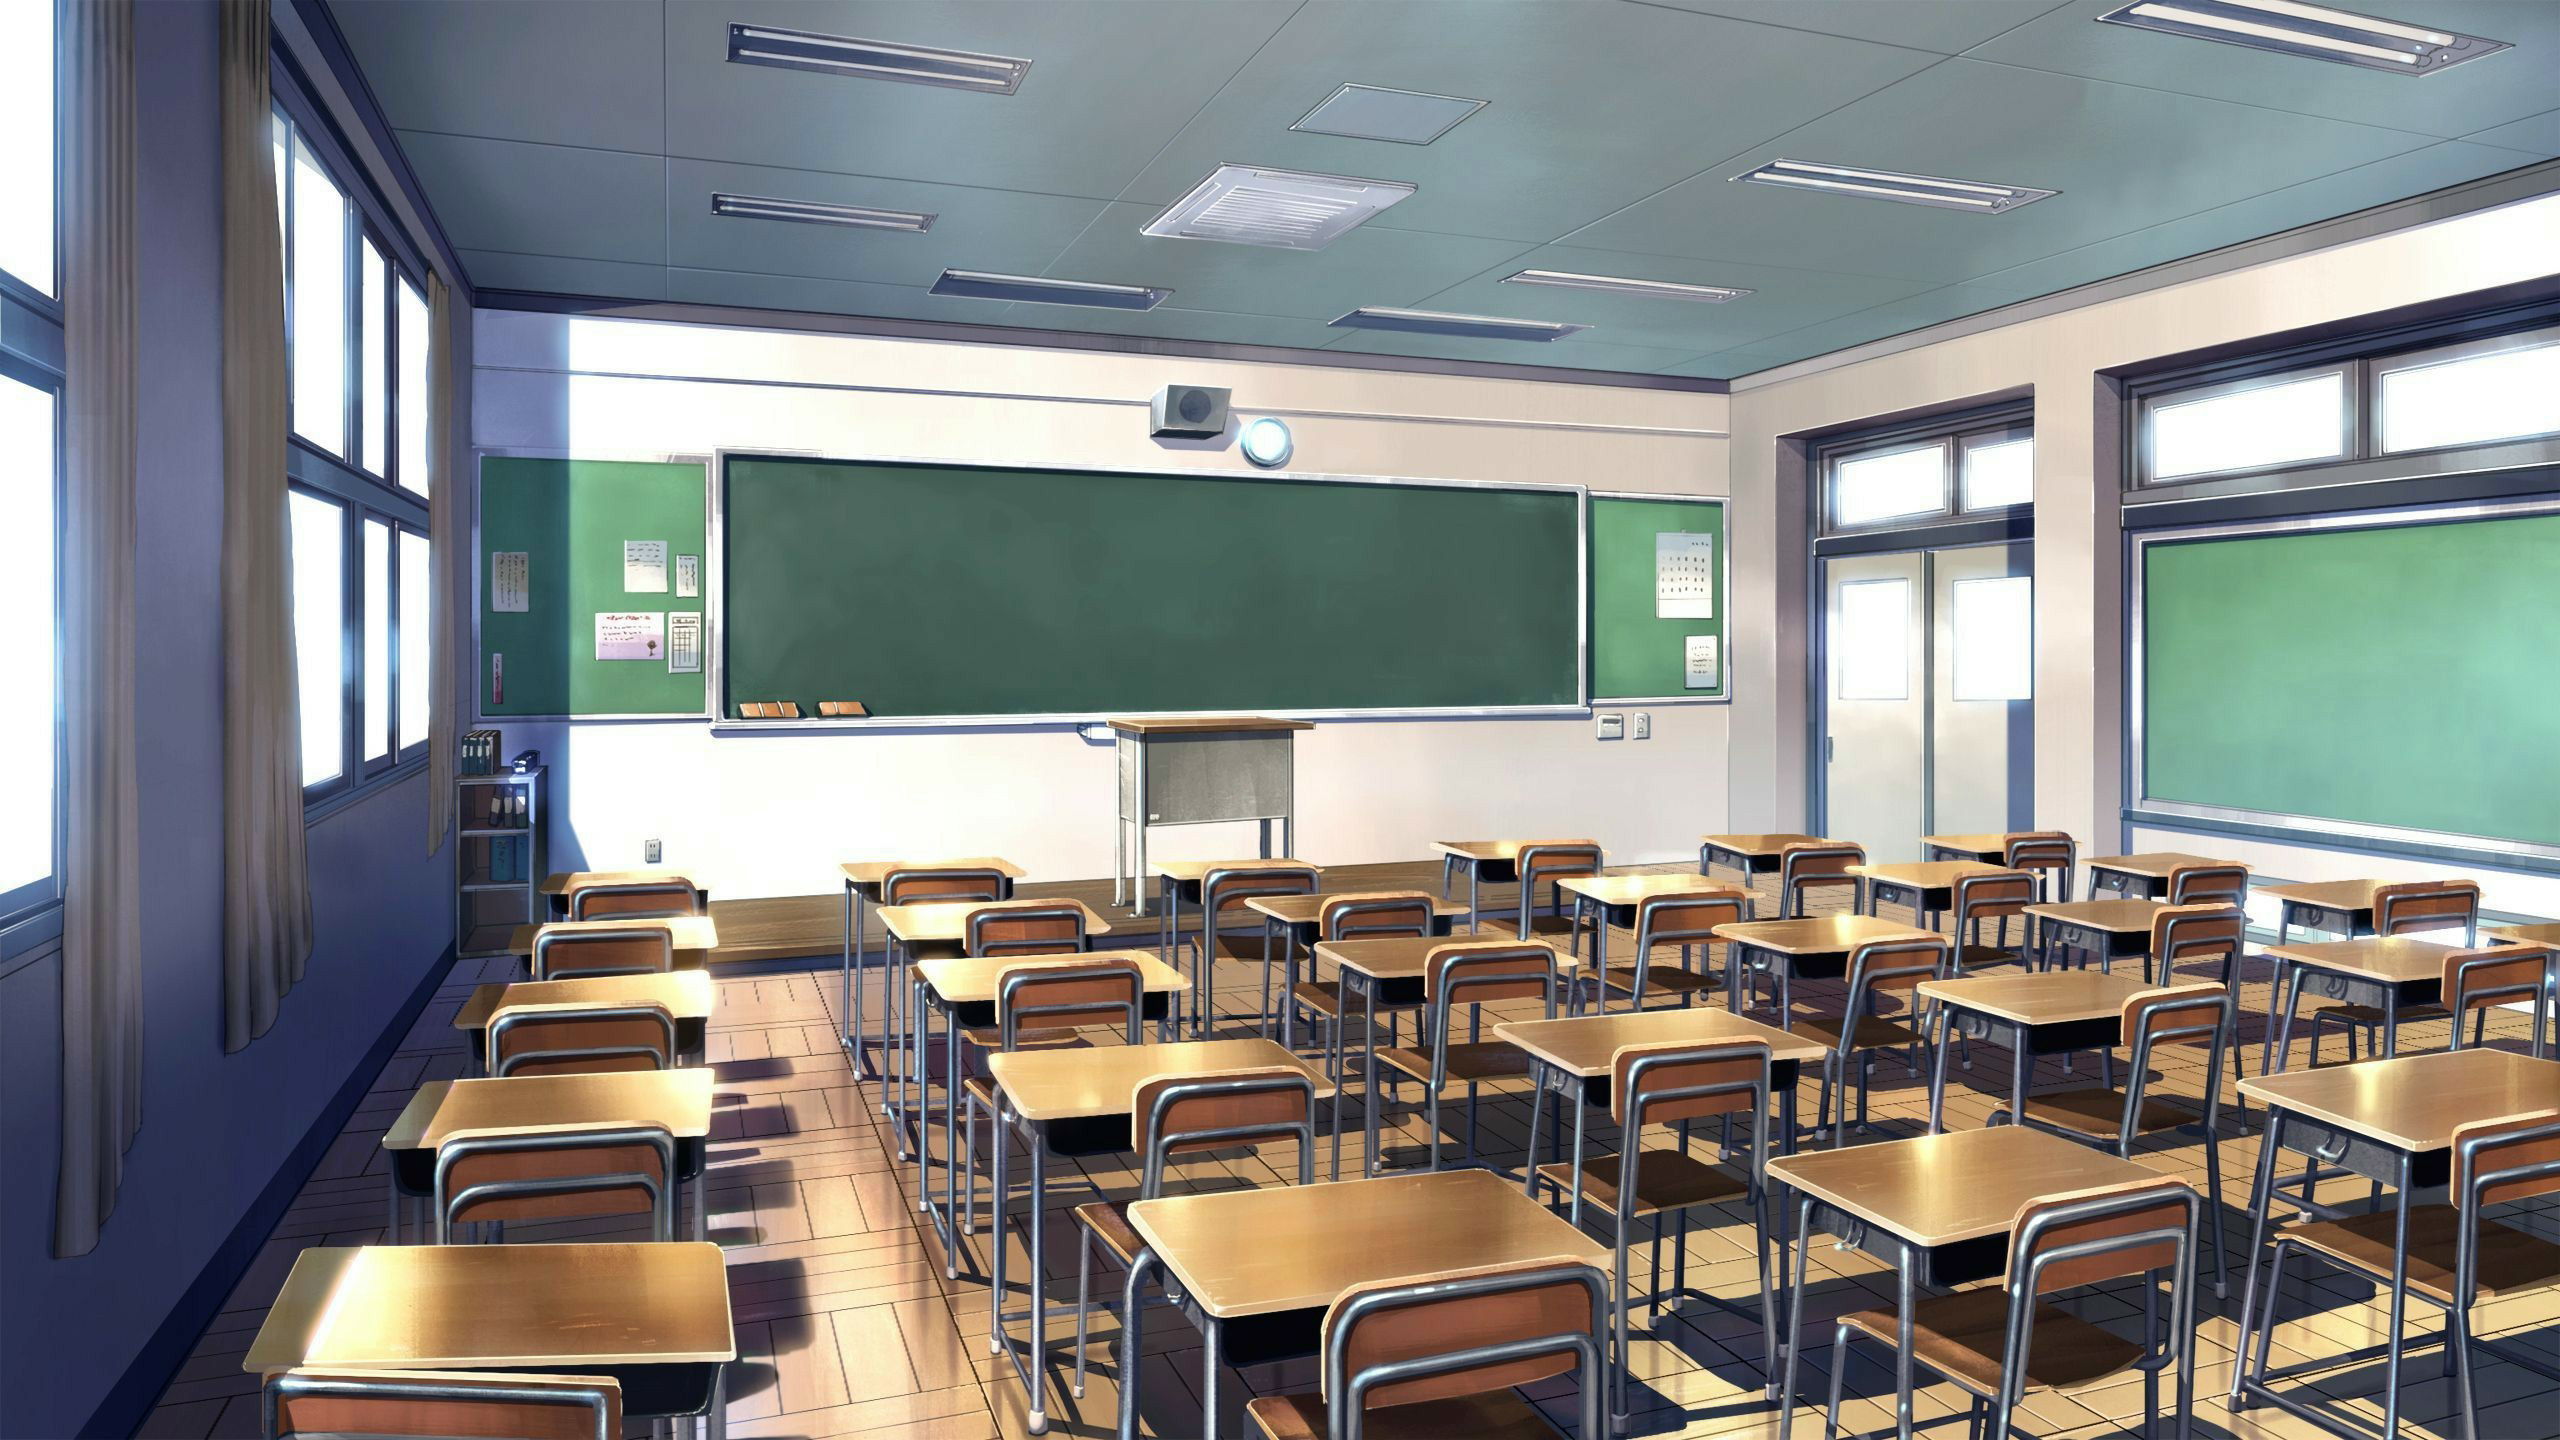 Anime Classroom Wallpapers - Top Free Anime Classroom Backgrounds ...